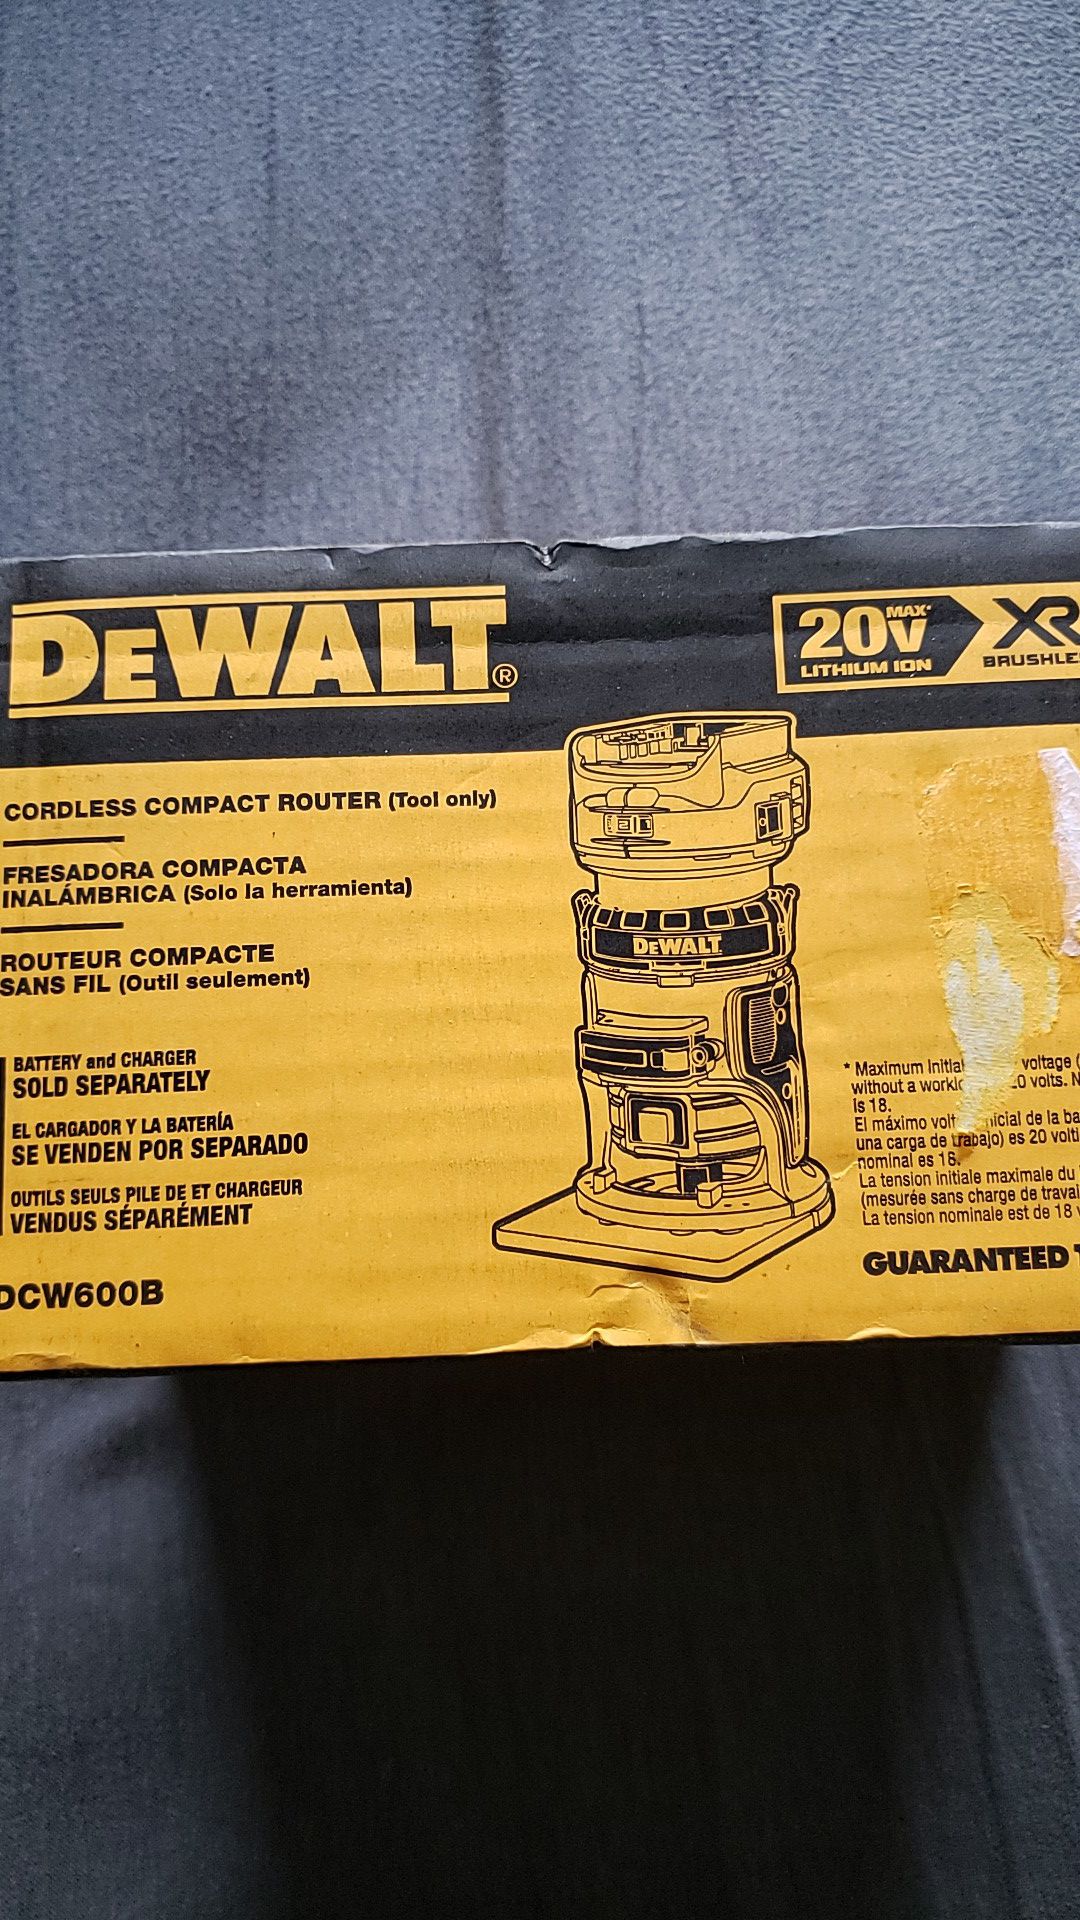 Dewalt 20v brushless xr router brand new unopened bare tool no battery no charger $100 FIRM NO OFFERS NO MENOS